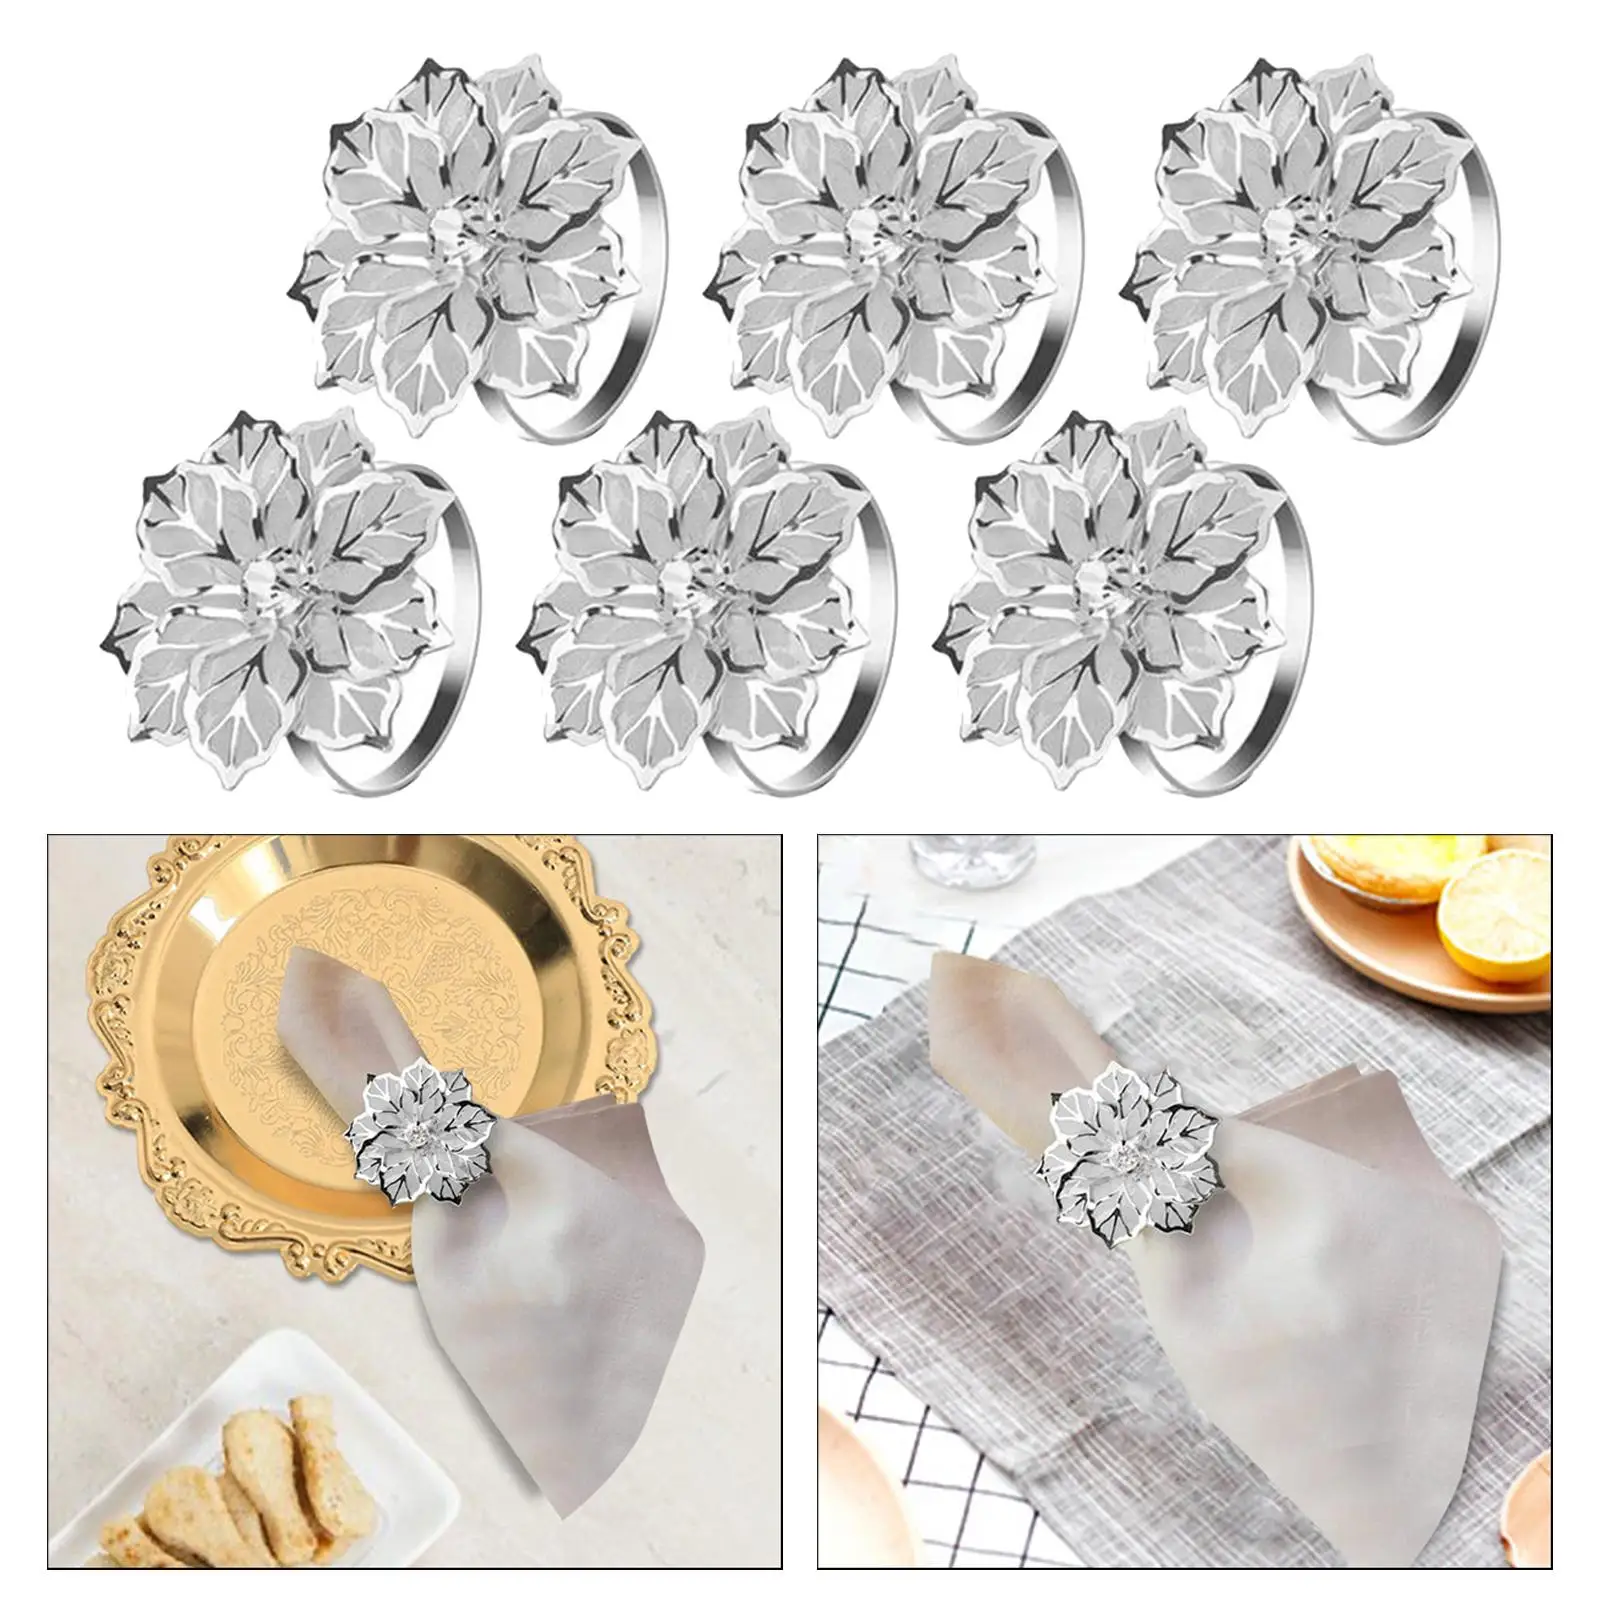 6x Flowers Napkin Rings Table Setting Accessory Dinner Table Tableware Wedding Decor for Party Halloween Hotel